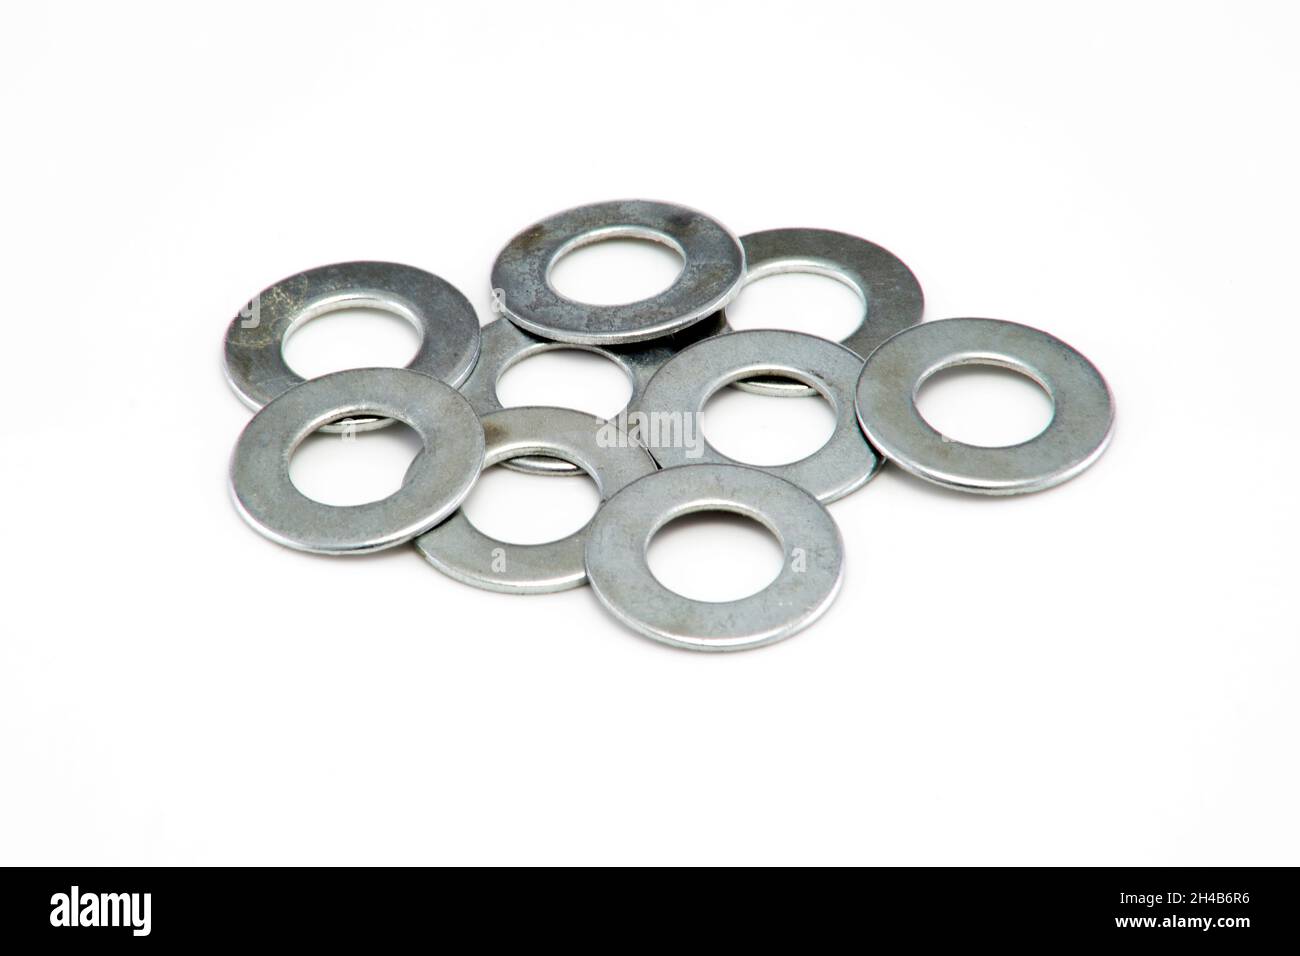 Pile of washers of different sizes background image Stock Photo